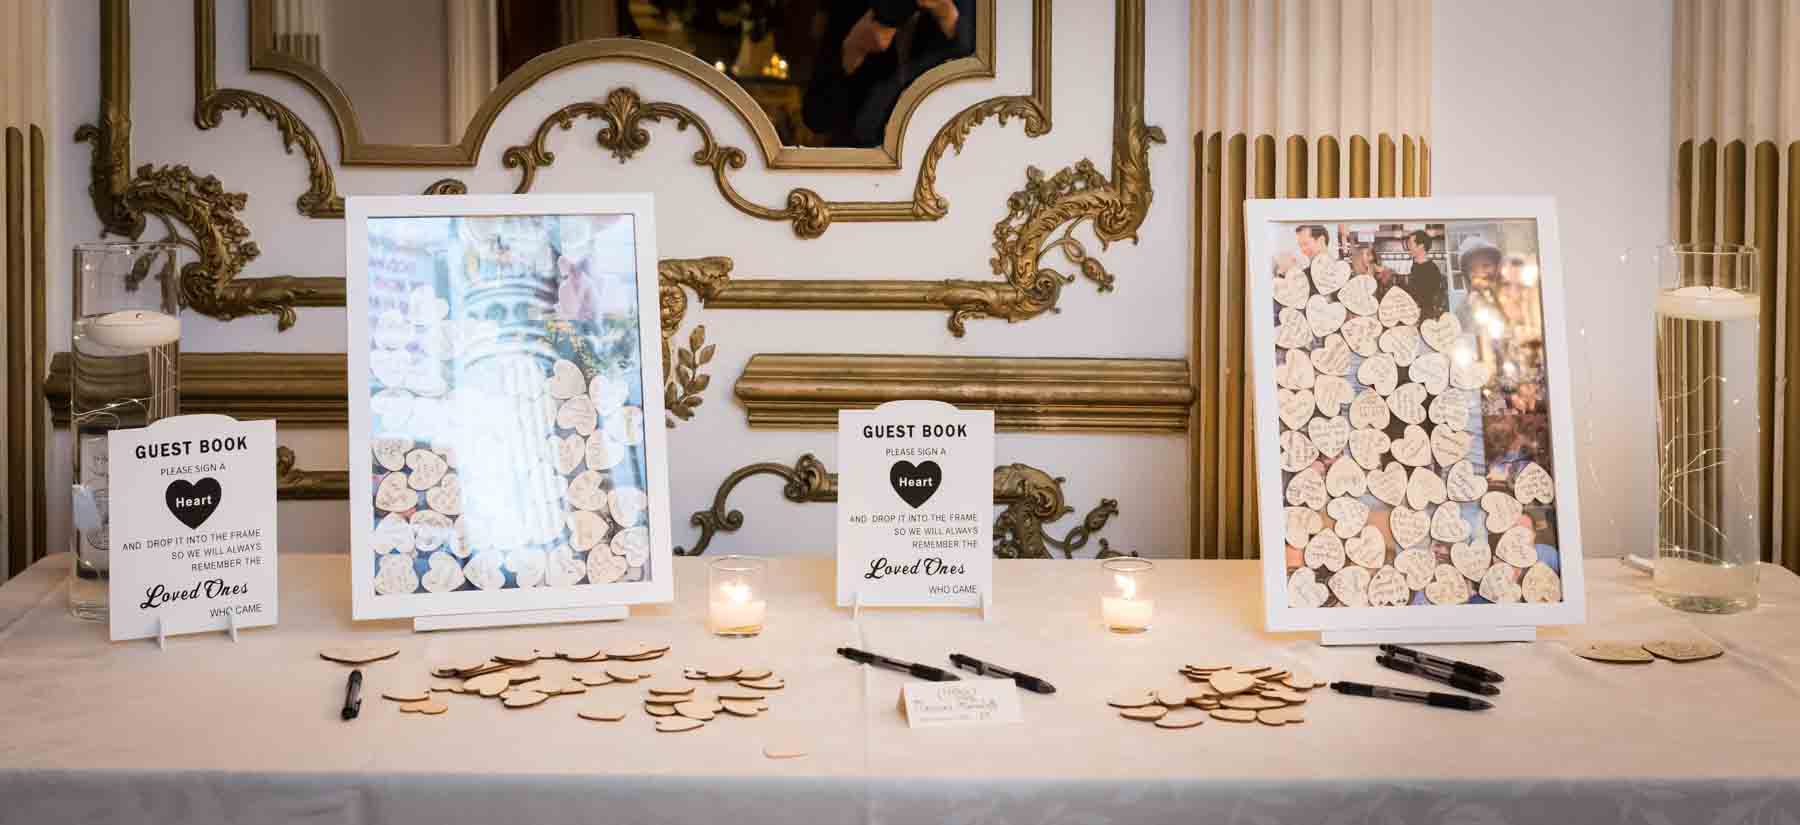 Table displaying guest book with wooden hearts and white frames